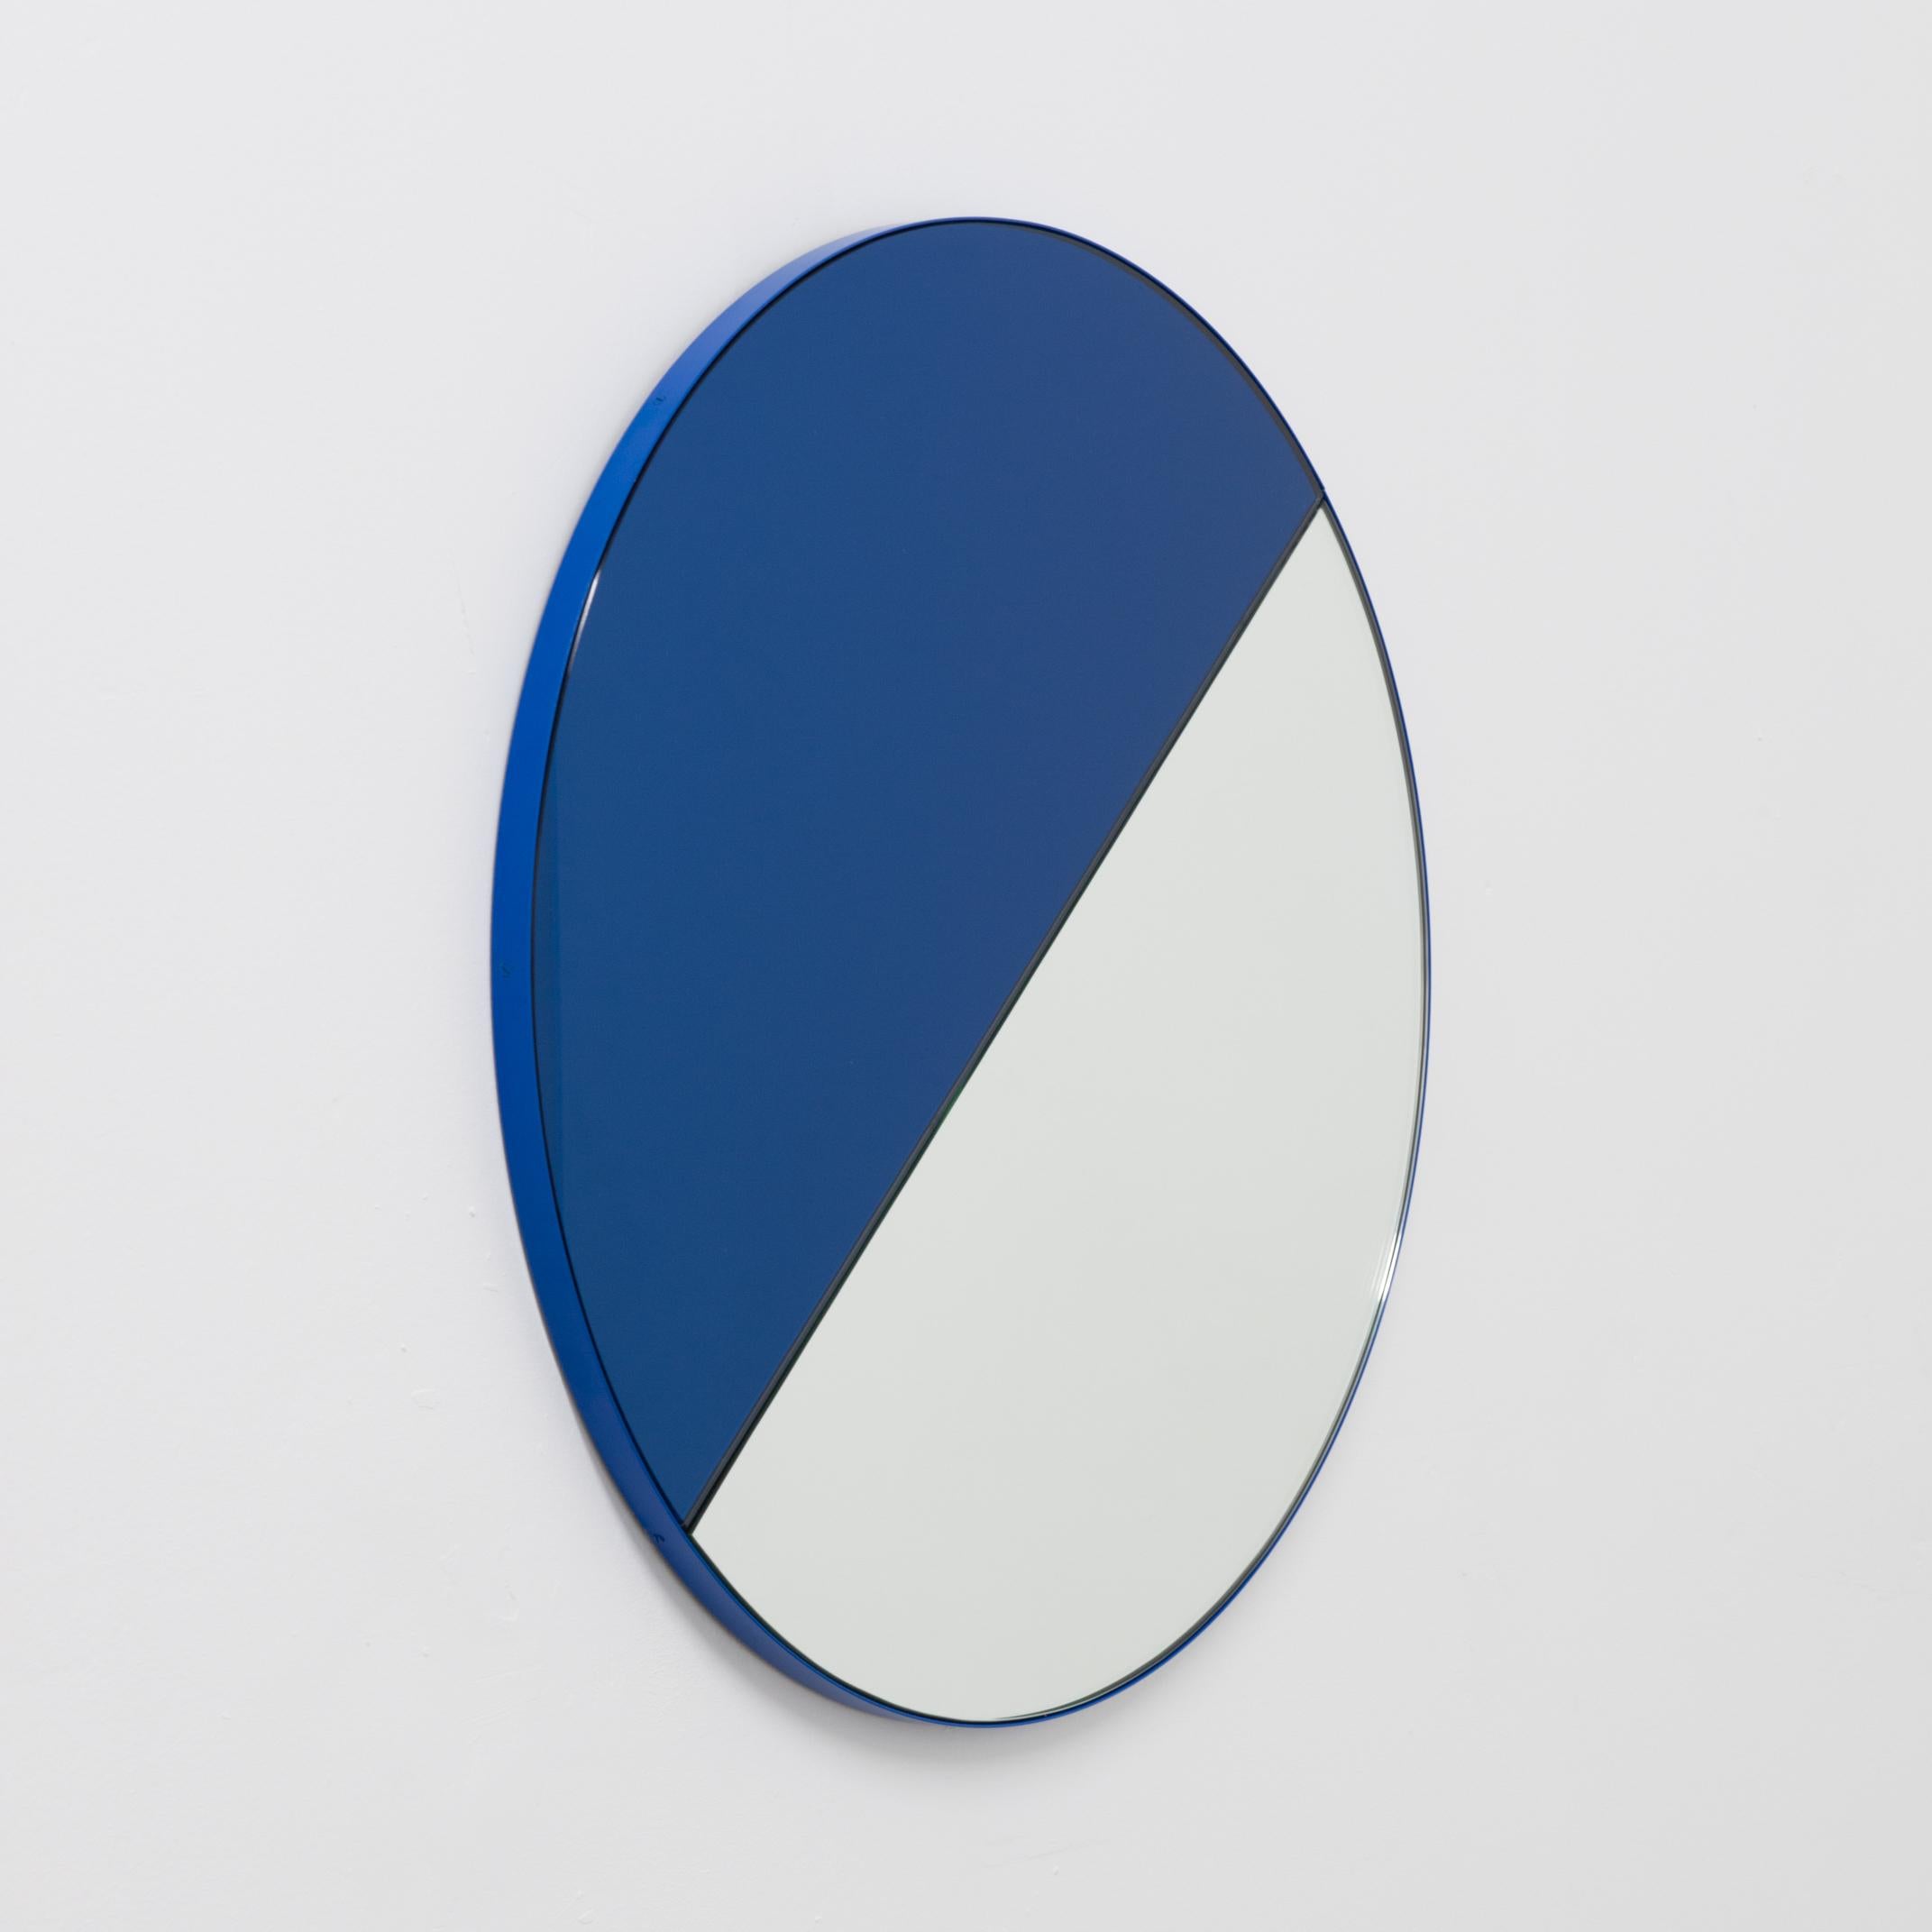 Contemporary Orbis Dualis Mixed Tint Blue and Silver Round Mirror with Blue Frame, Regular For Sale